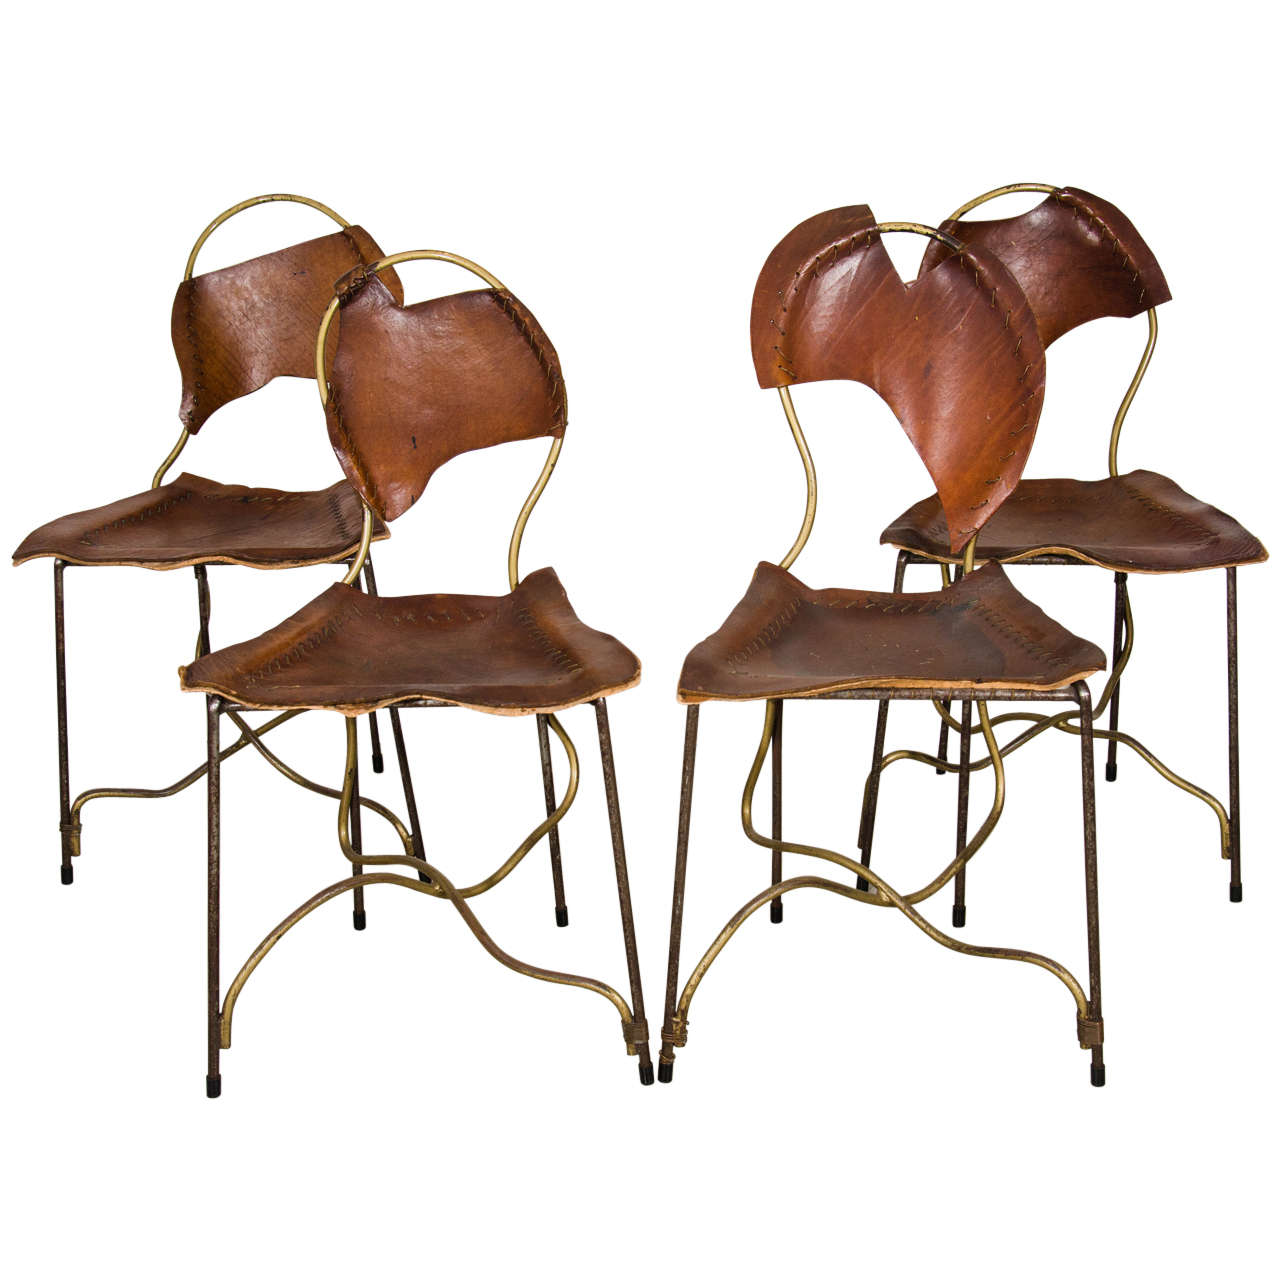 Rob Eckhardt "Dolores" Chairs For Sale